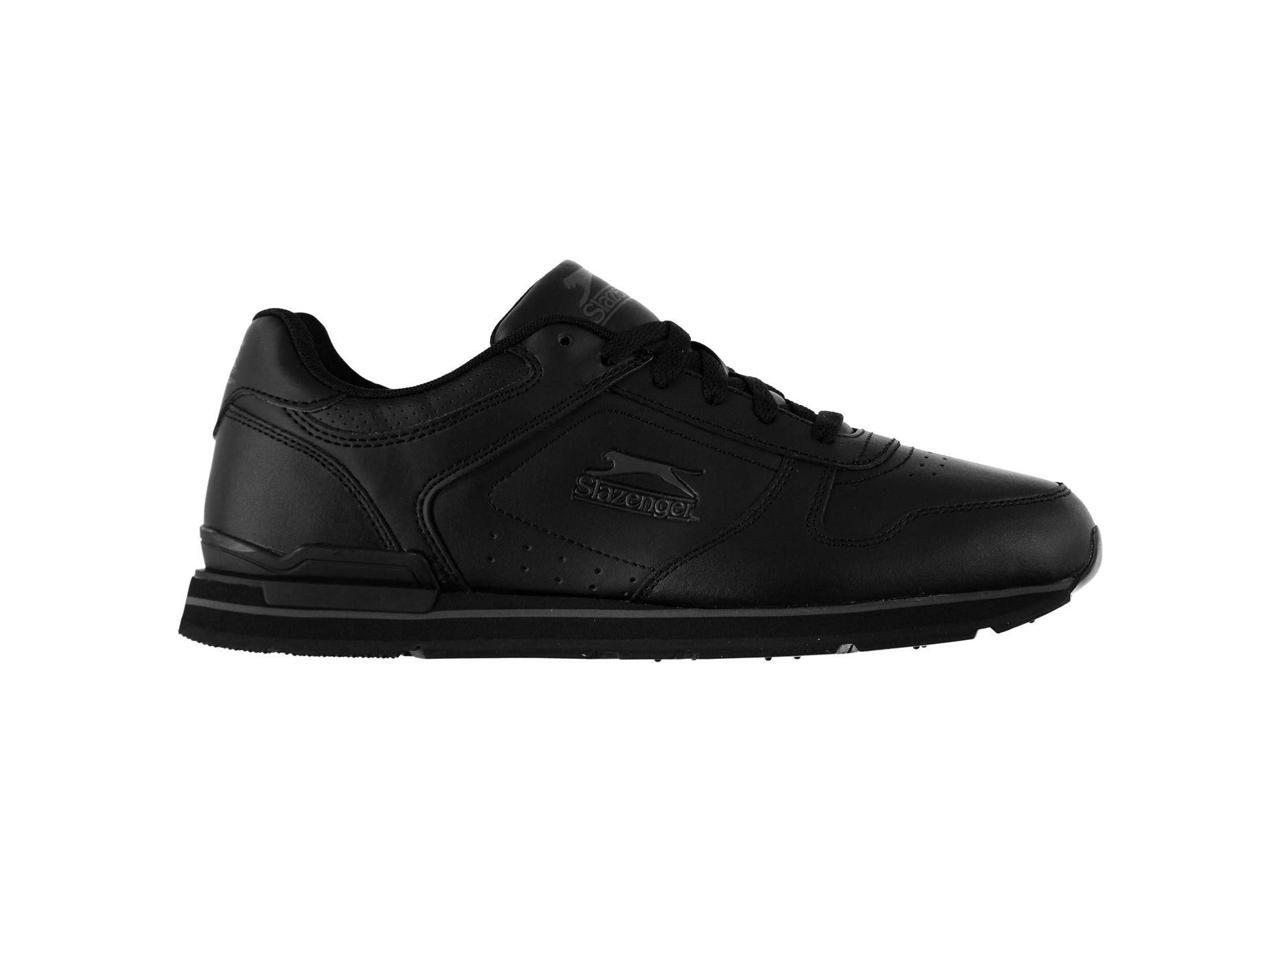 Slazenger Classic Mens Trainers Lace Up 